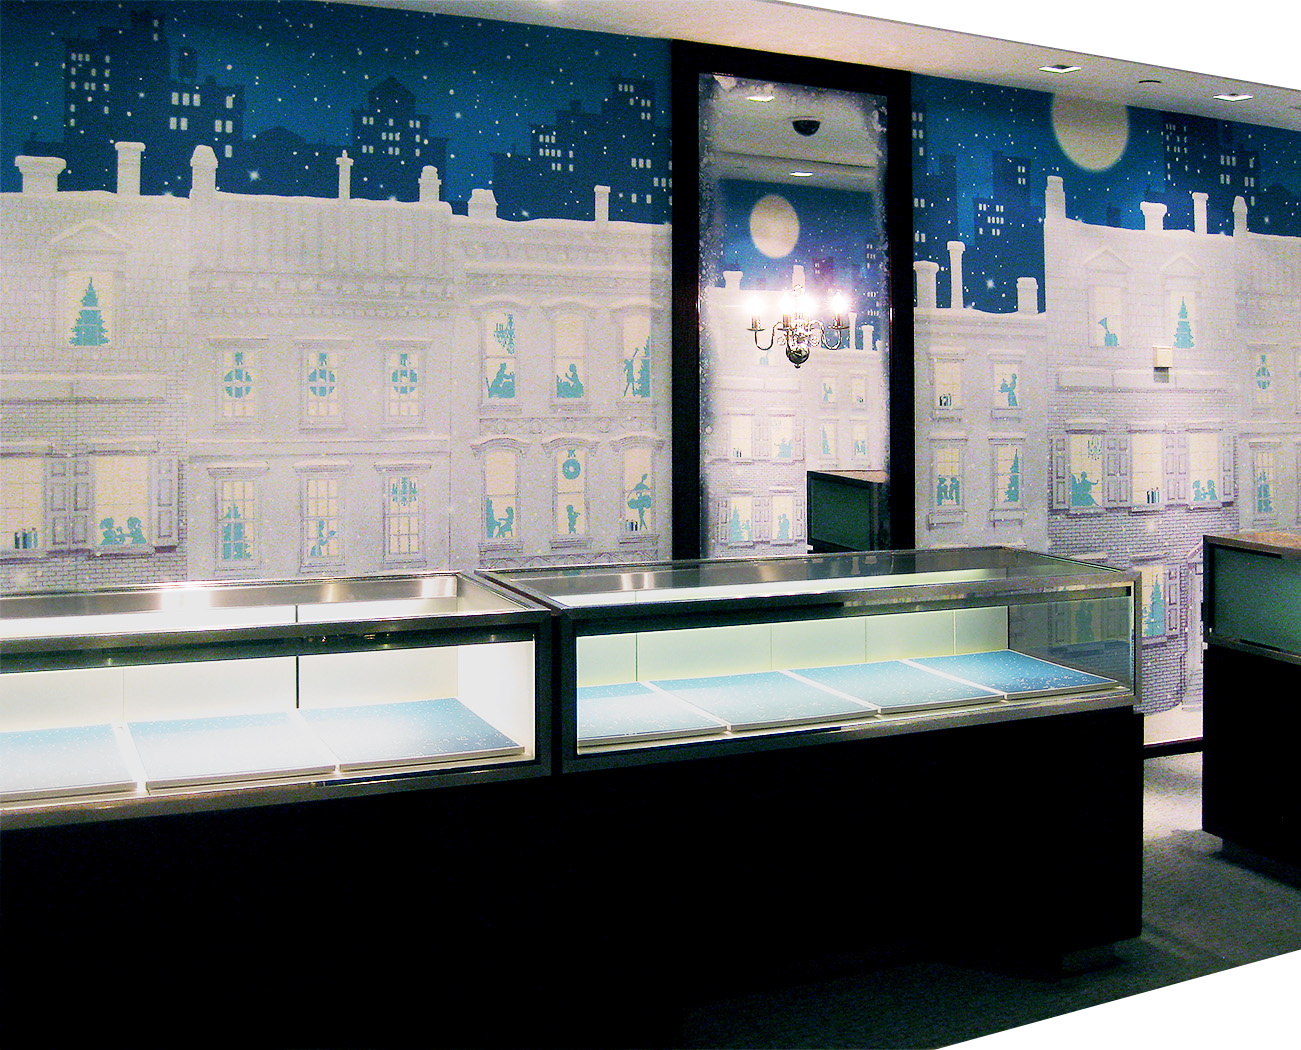 custom printed wallpaper with winter and Christmas scene for retail display